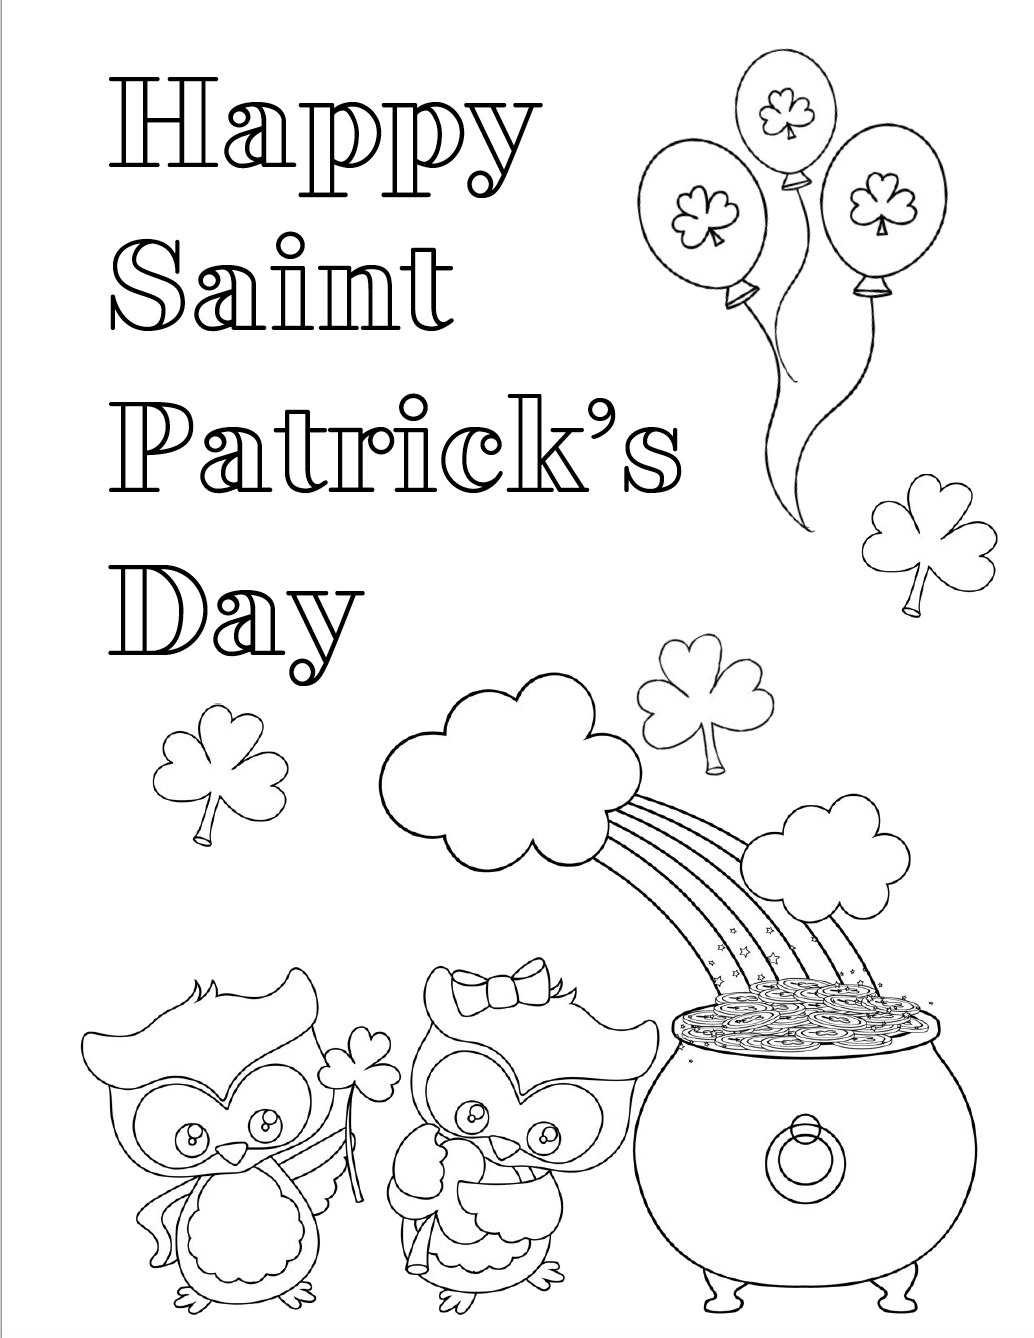 st-patricks-day-images-coloring-pages-coloring-pages